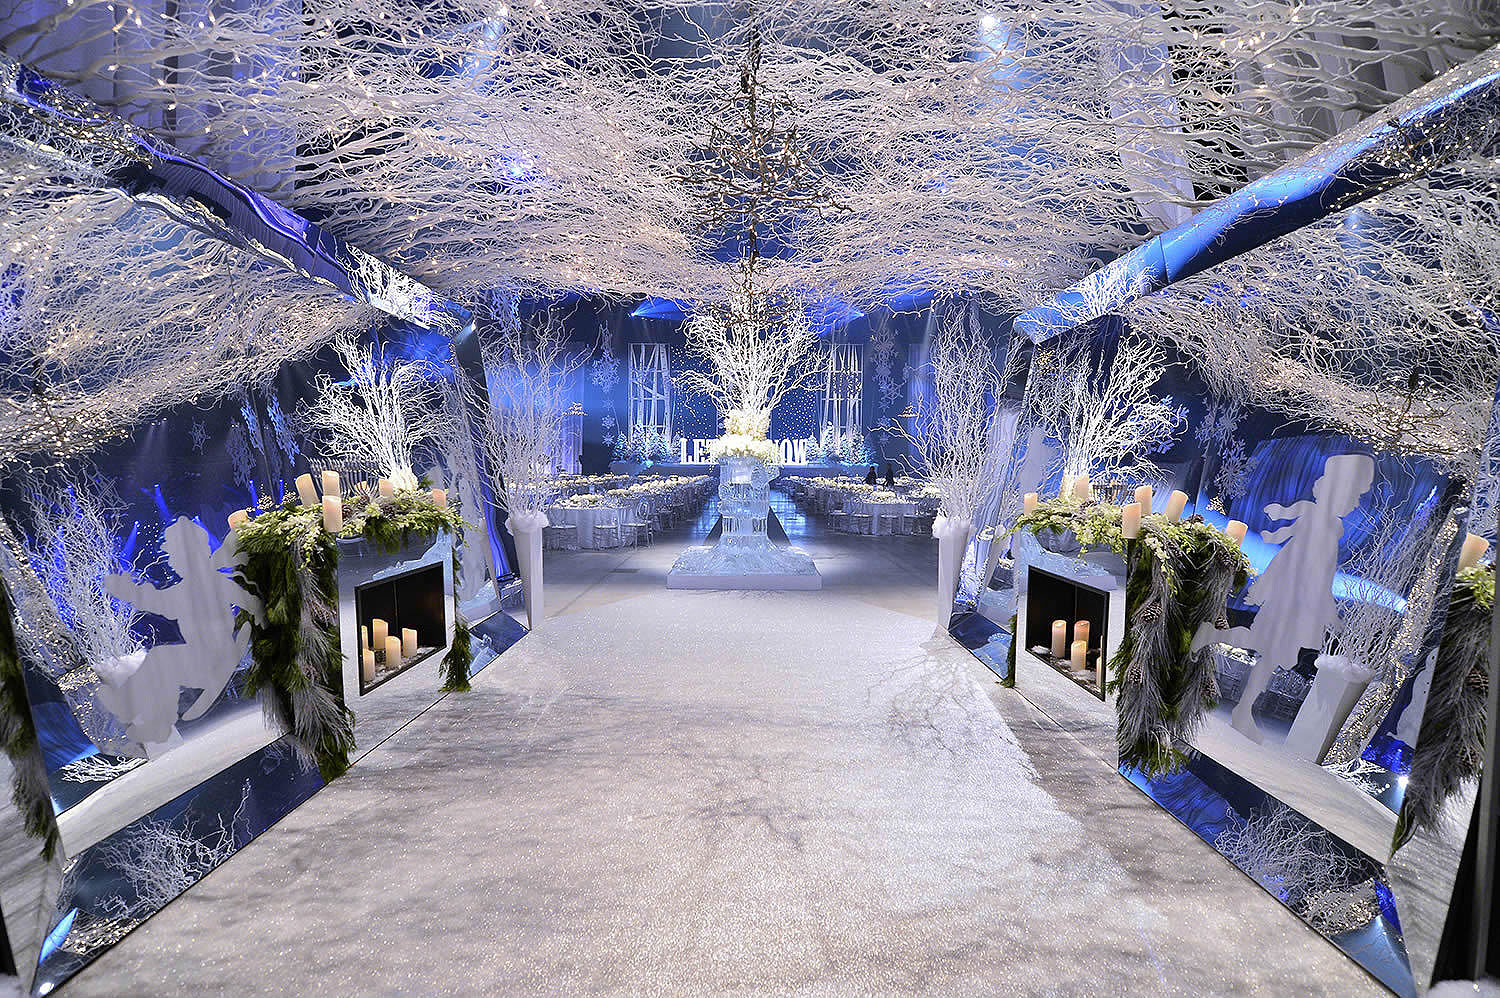 Decor and More Creates a Winter Wonderland-theme Special Event